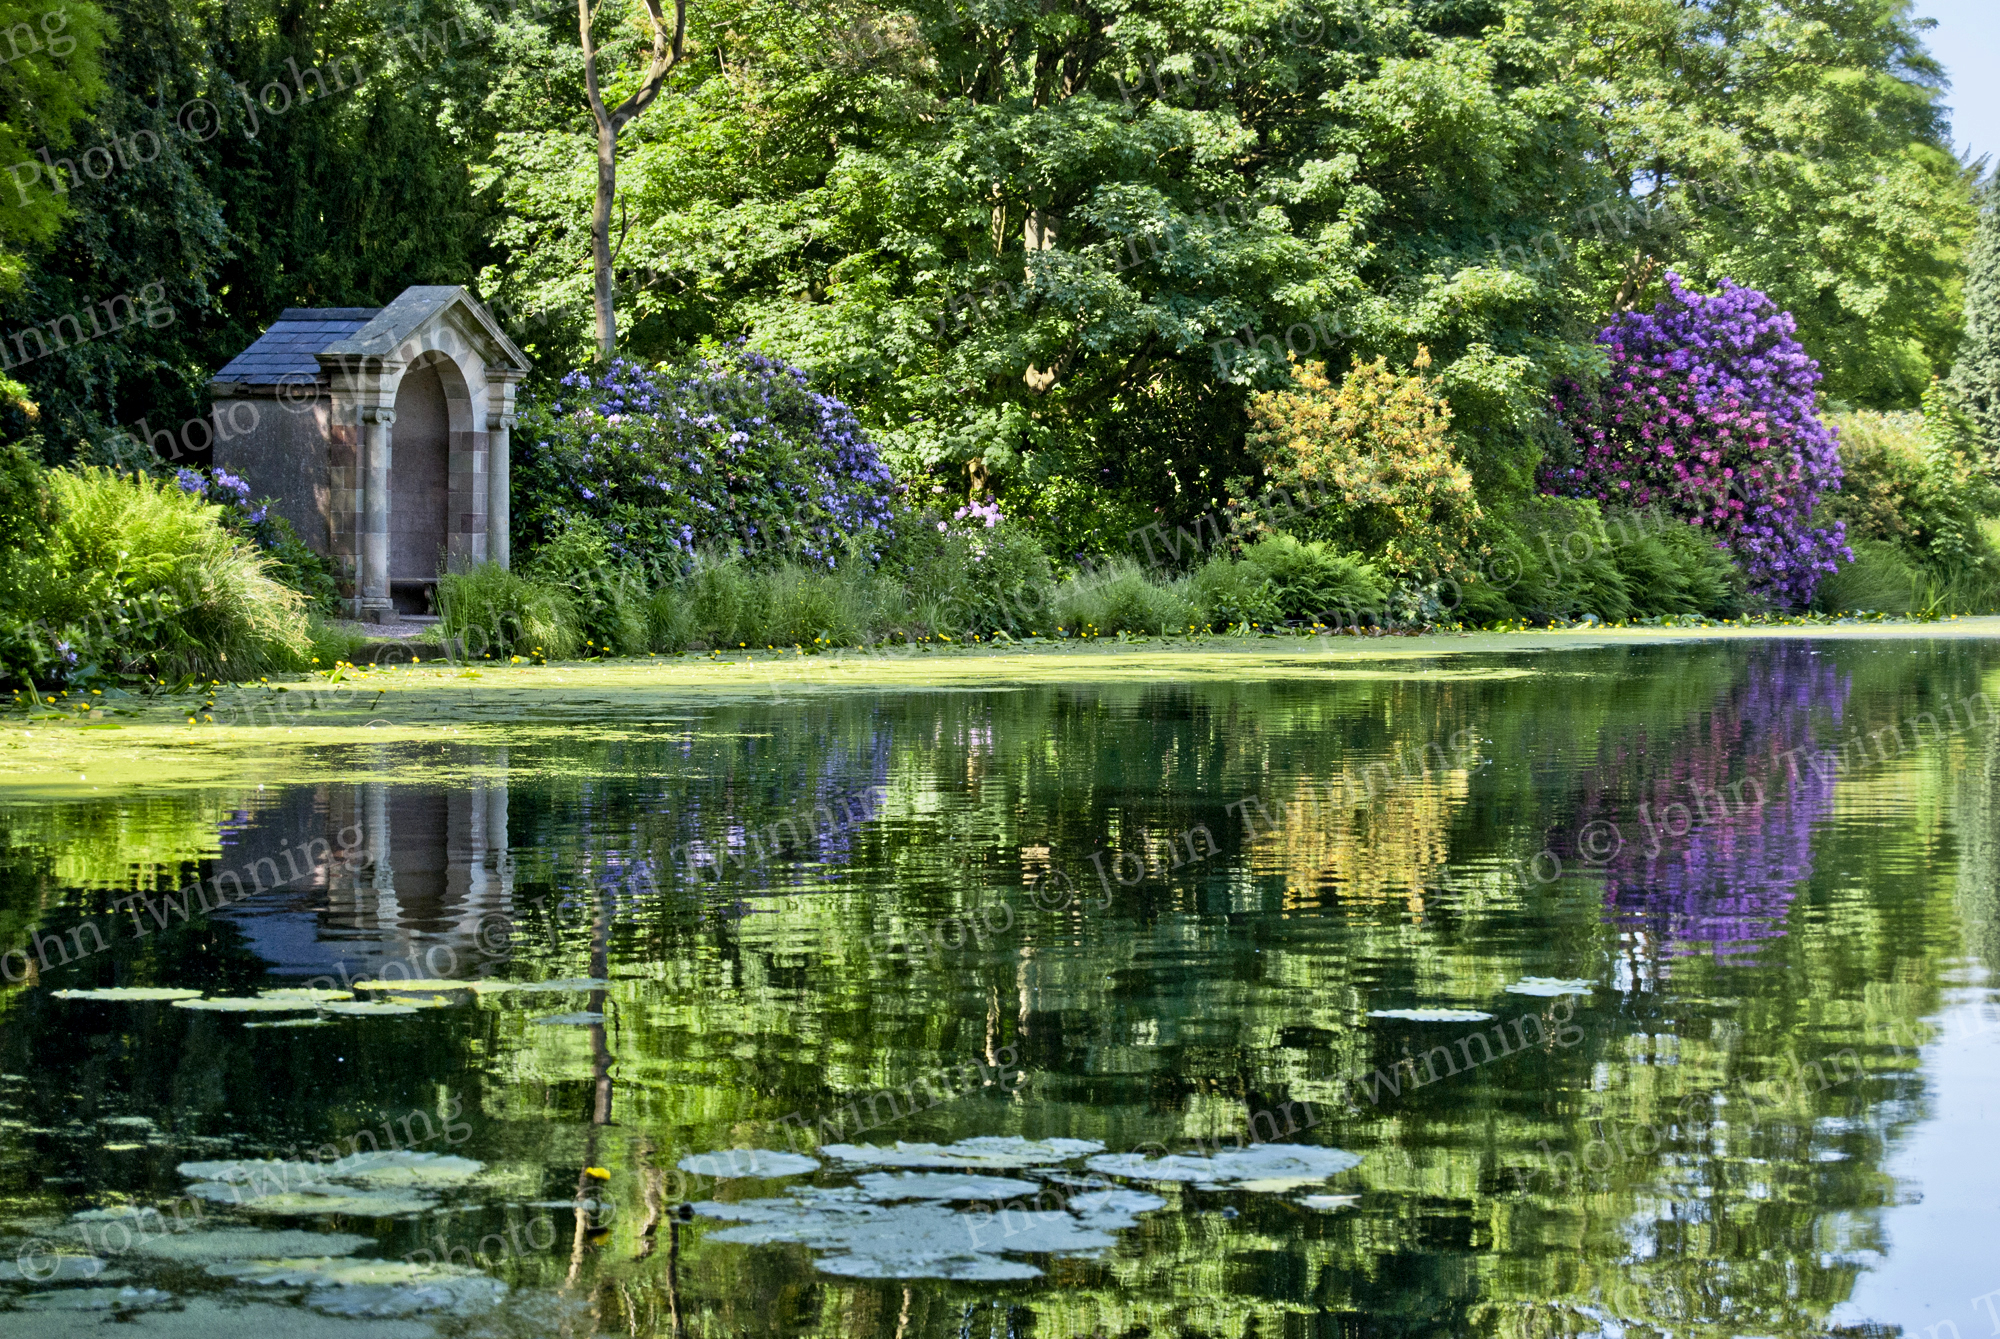 'Safe Arbor' [photo] - art print from a photograph of an arbor beside a placid lake with reflected summer colours